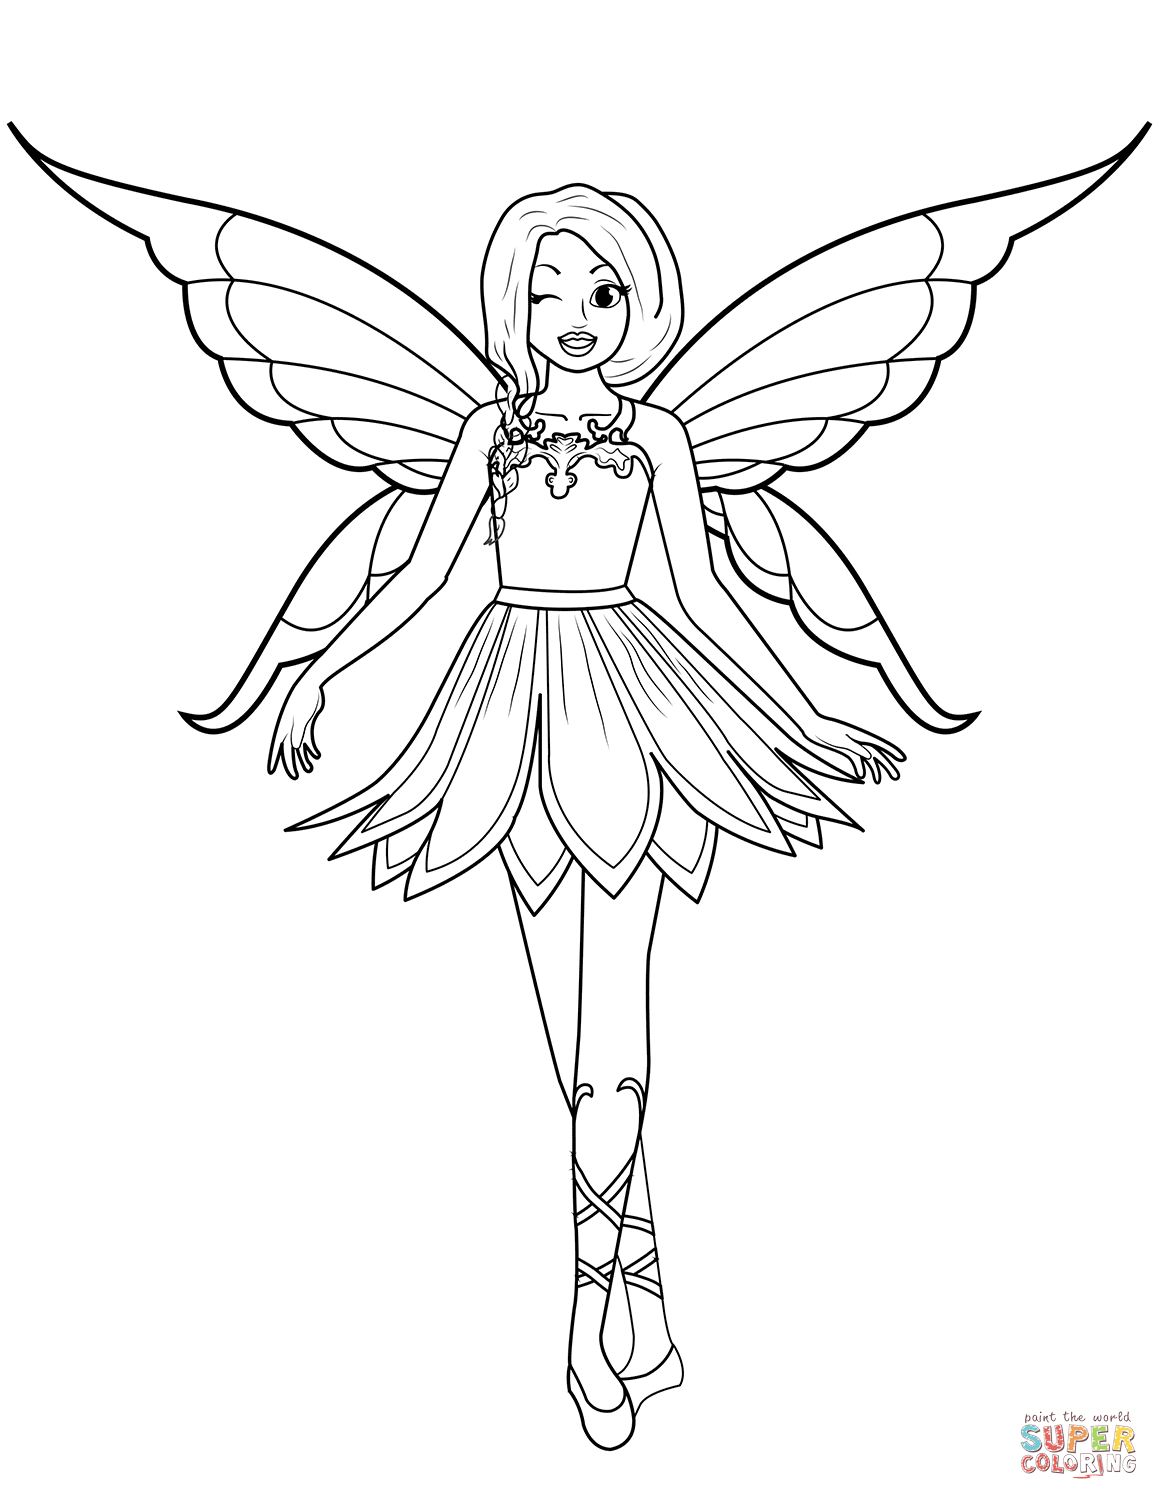 Fairy coloring pages | Free Coloring Pages